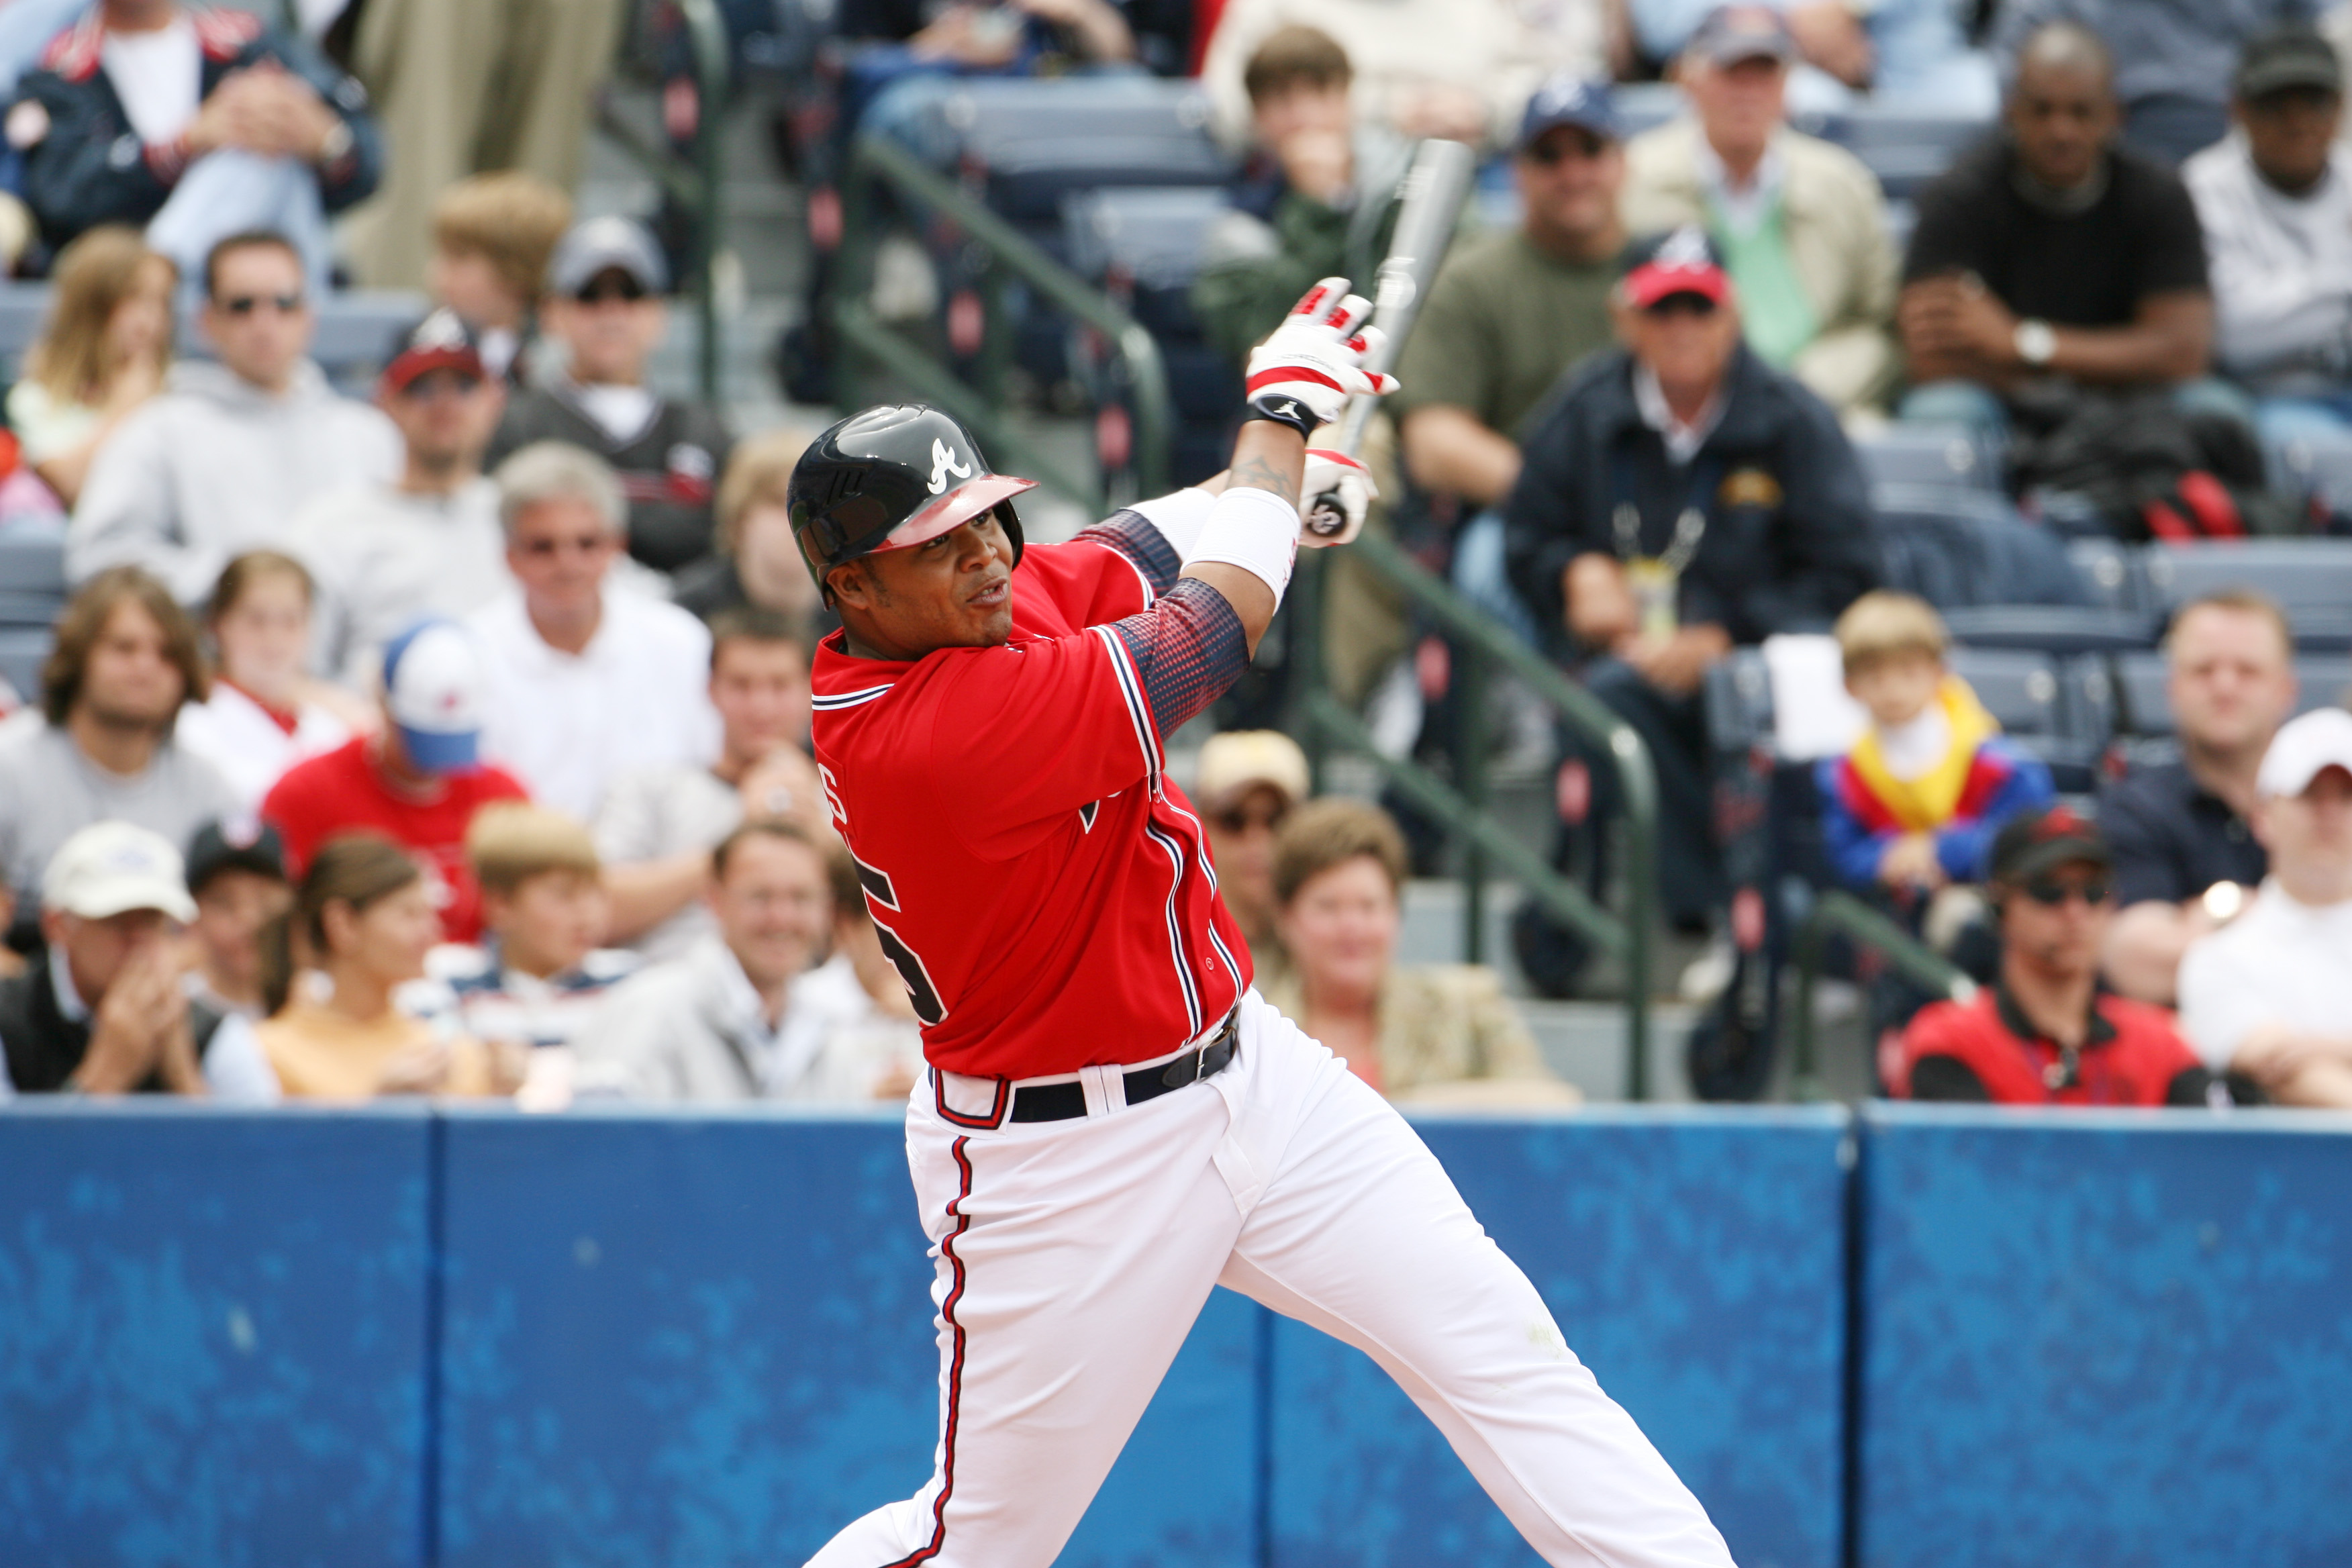 Braves officially retire number of legendary outfielder Andruw